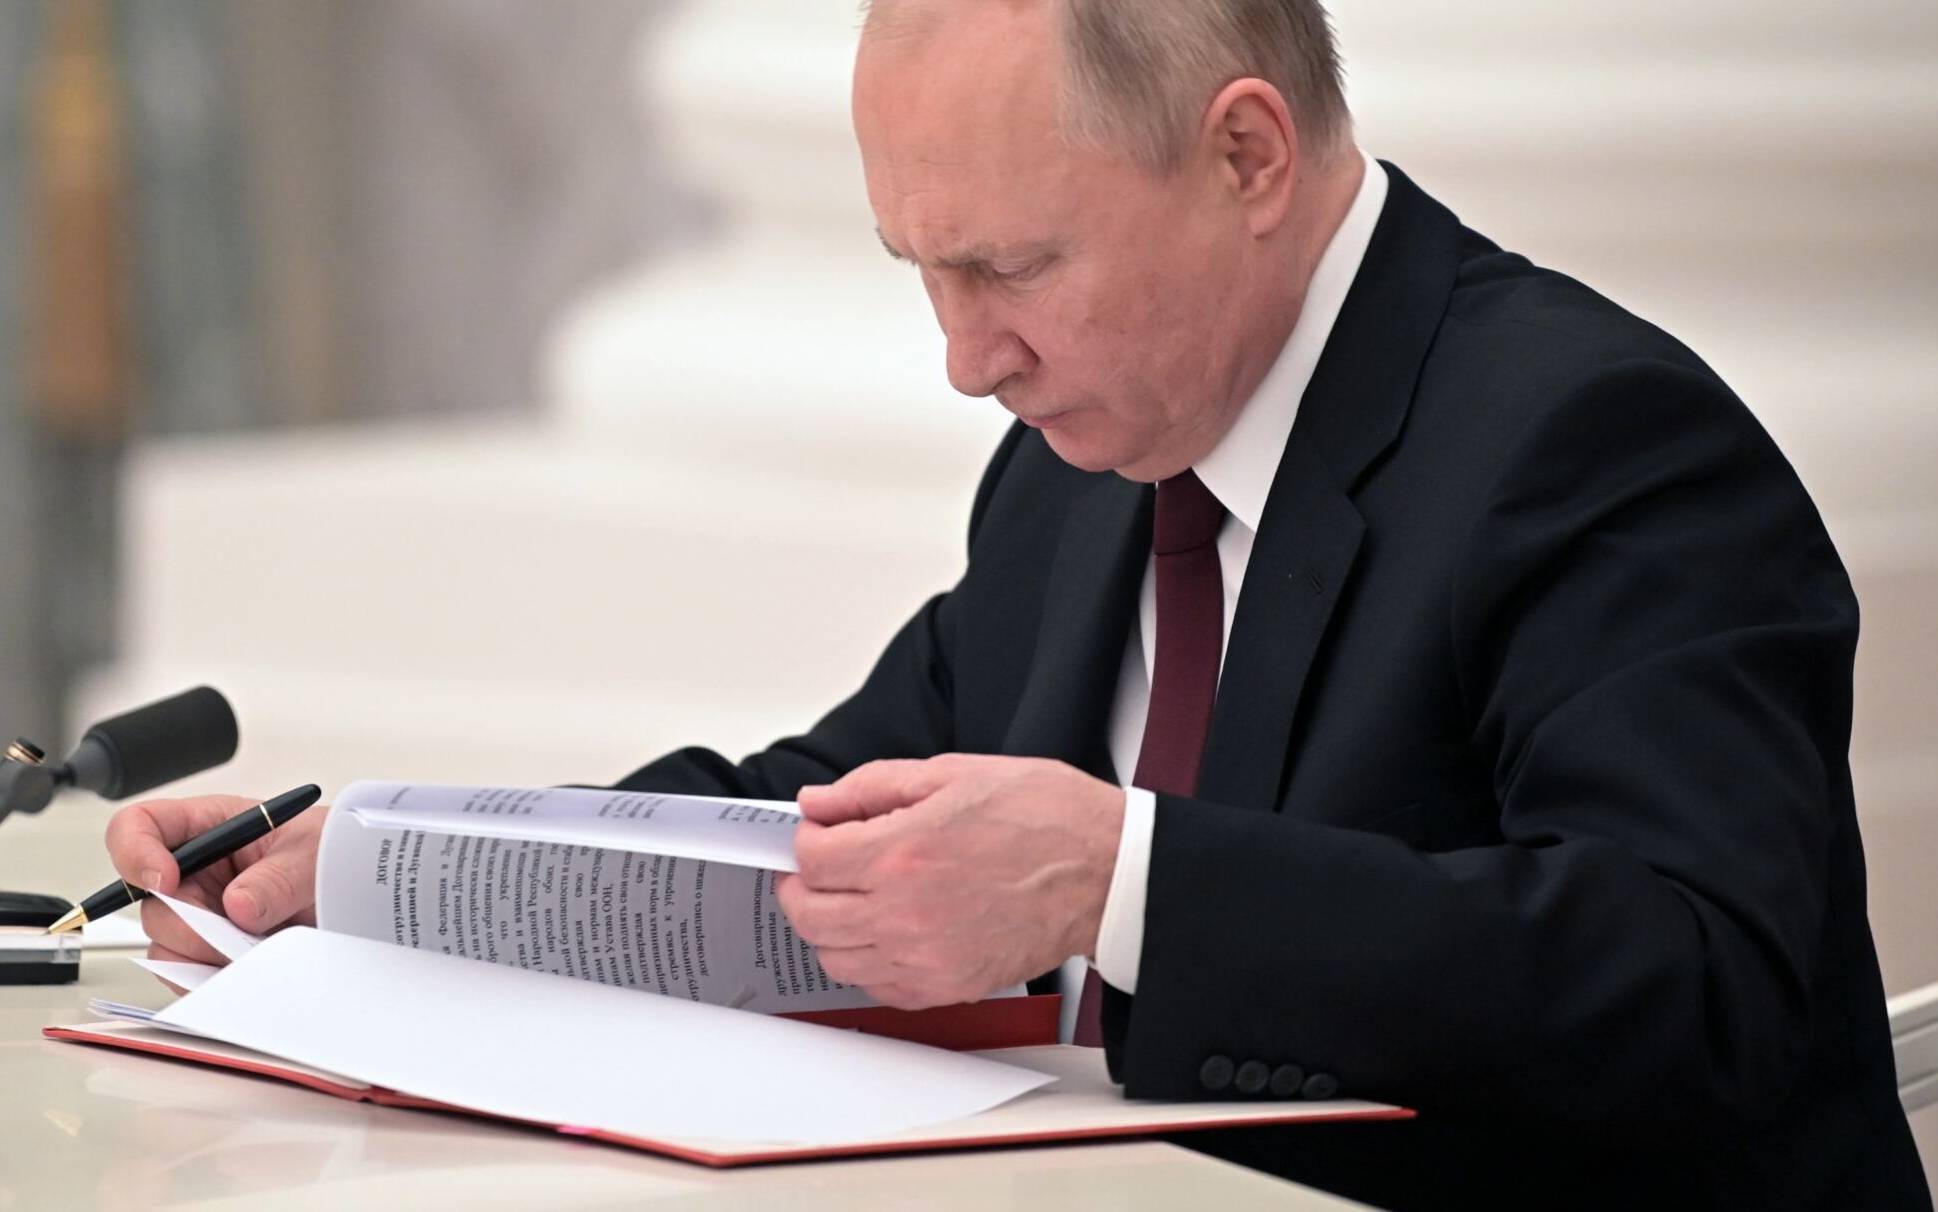 Russian President Vladimir Putin signs documents, including a decree recognising two Russian-backed breakaway regions in eastern Ukraine as independent, during a ceremony at the Kremlin in Moscow on February 21, 2022. - President Vladimir Putin said on February 21, 2022, he would make a decision "today" on recognising the independence of east Ukraine's rebel republics, after Russia's top officials made impassioned speeches in favour of the move. (Photo by Alexey NIKOLSKY / Sputnik / AFP)